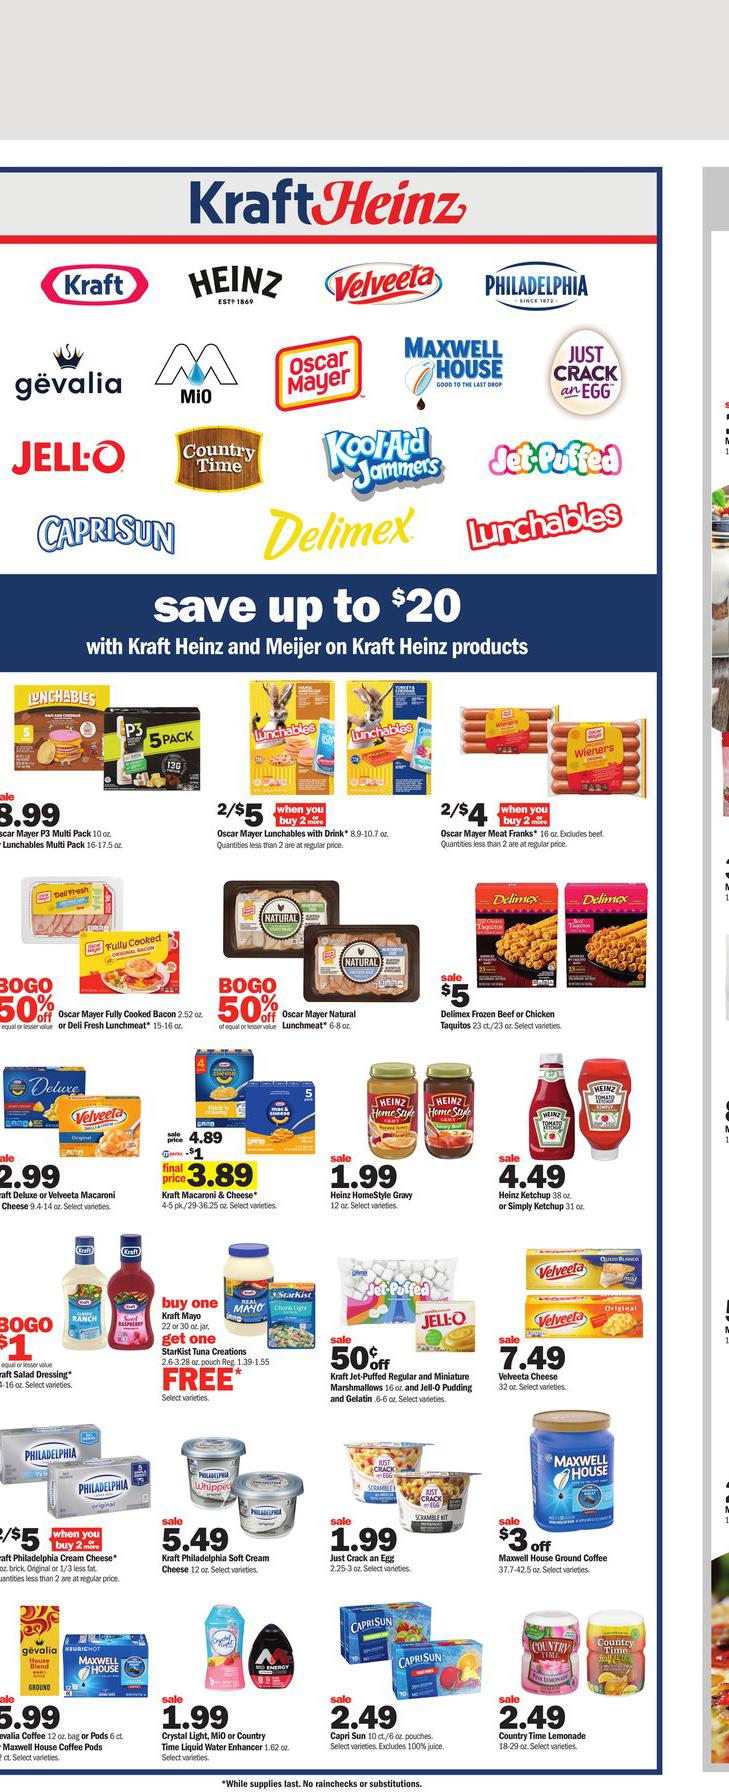 19.03.2023 Meijer ad 8. page